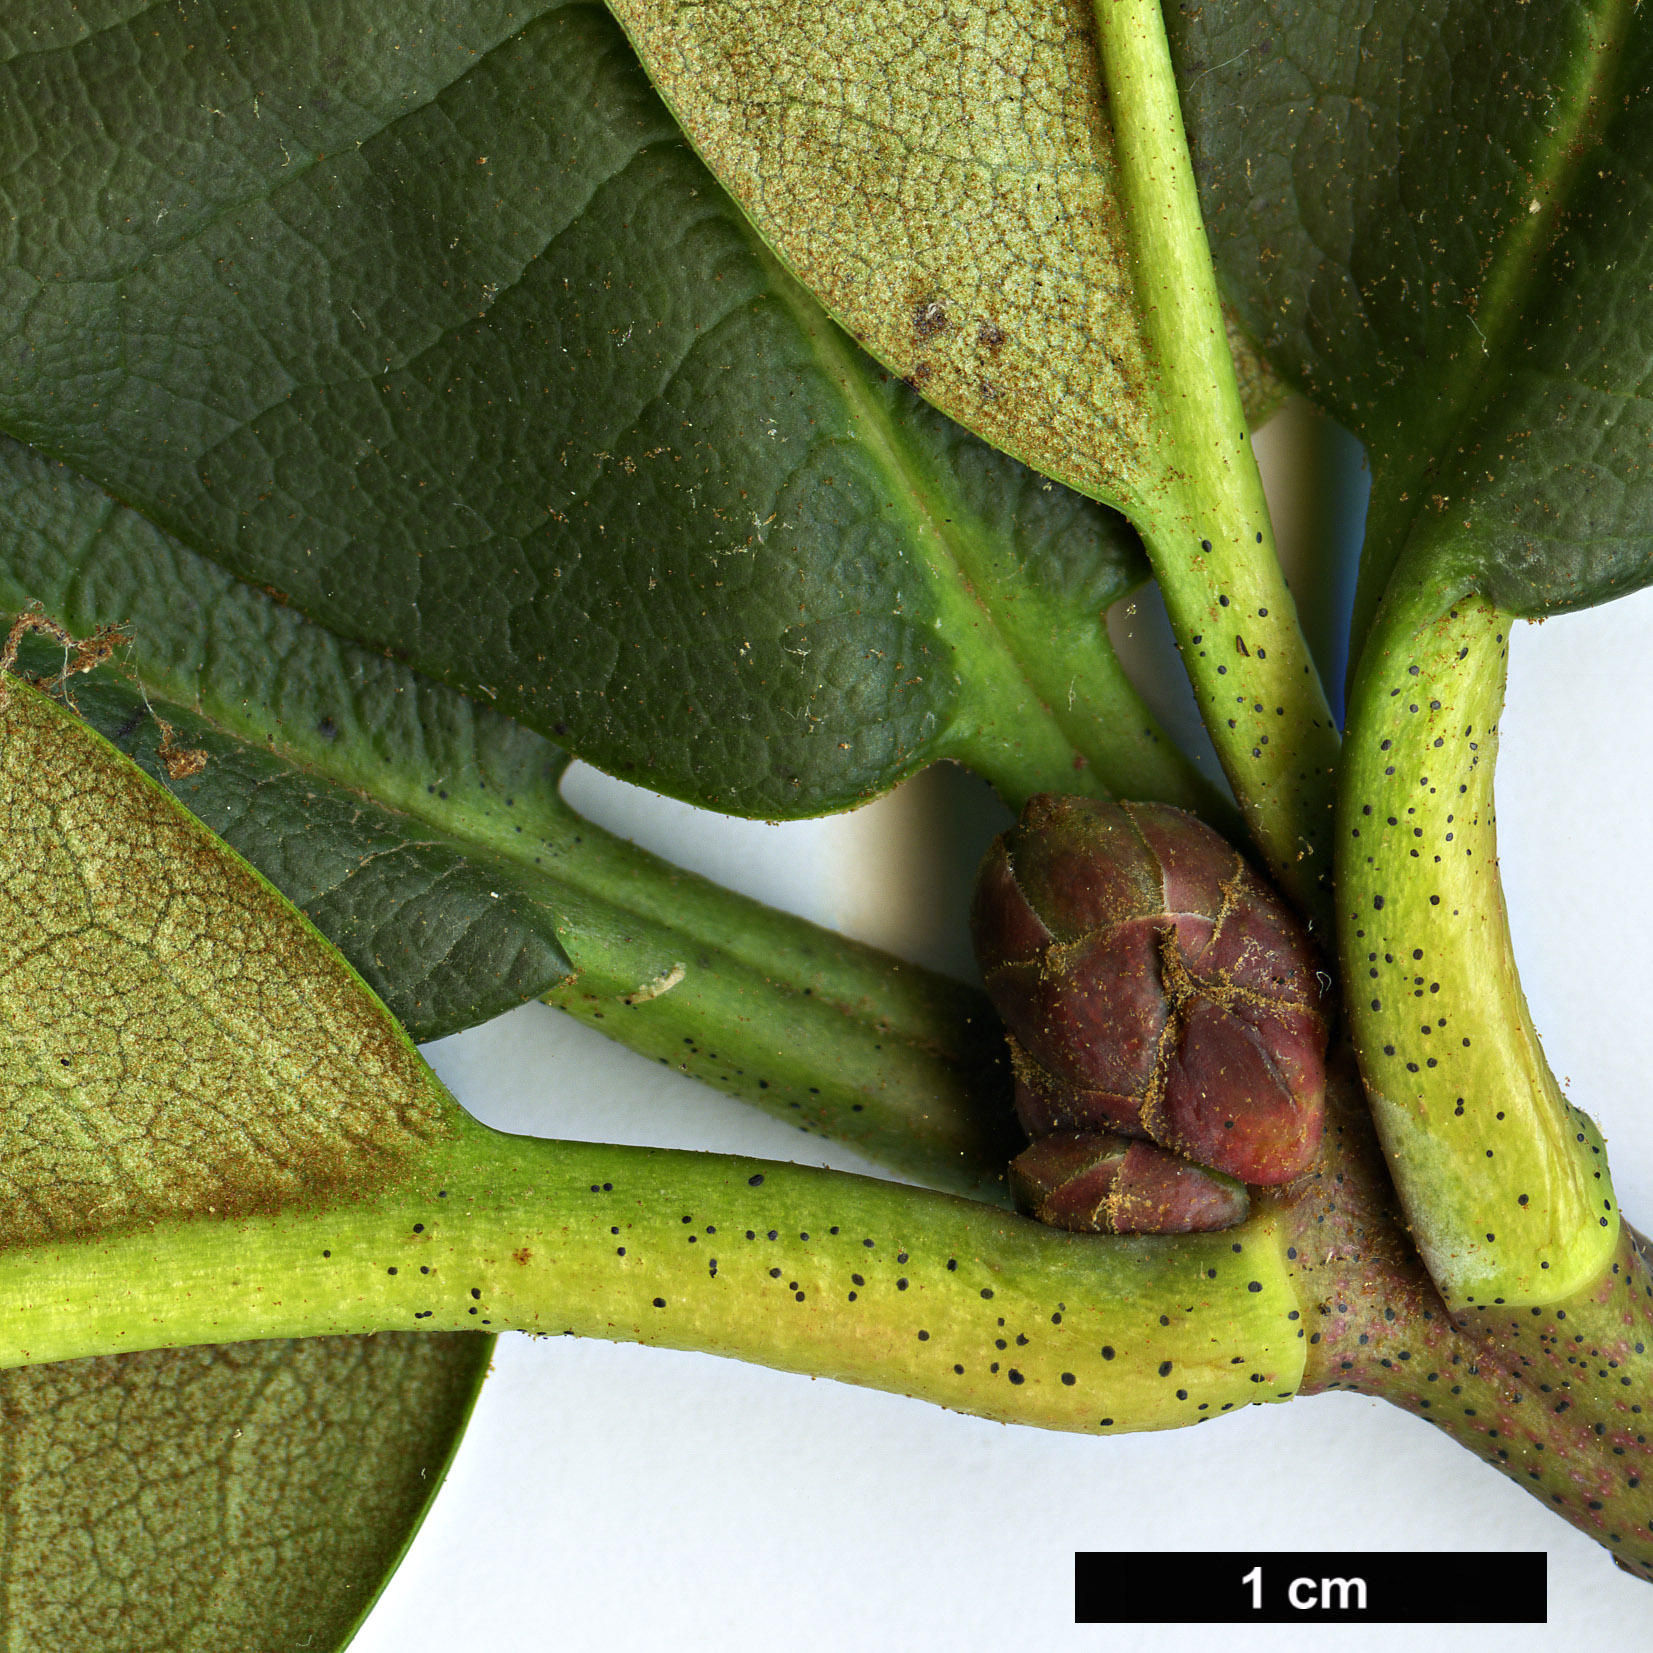 High resolution image: Family: Ericaceae - Genus: Rhododendron - Taxon: beesianum